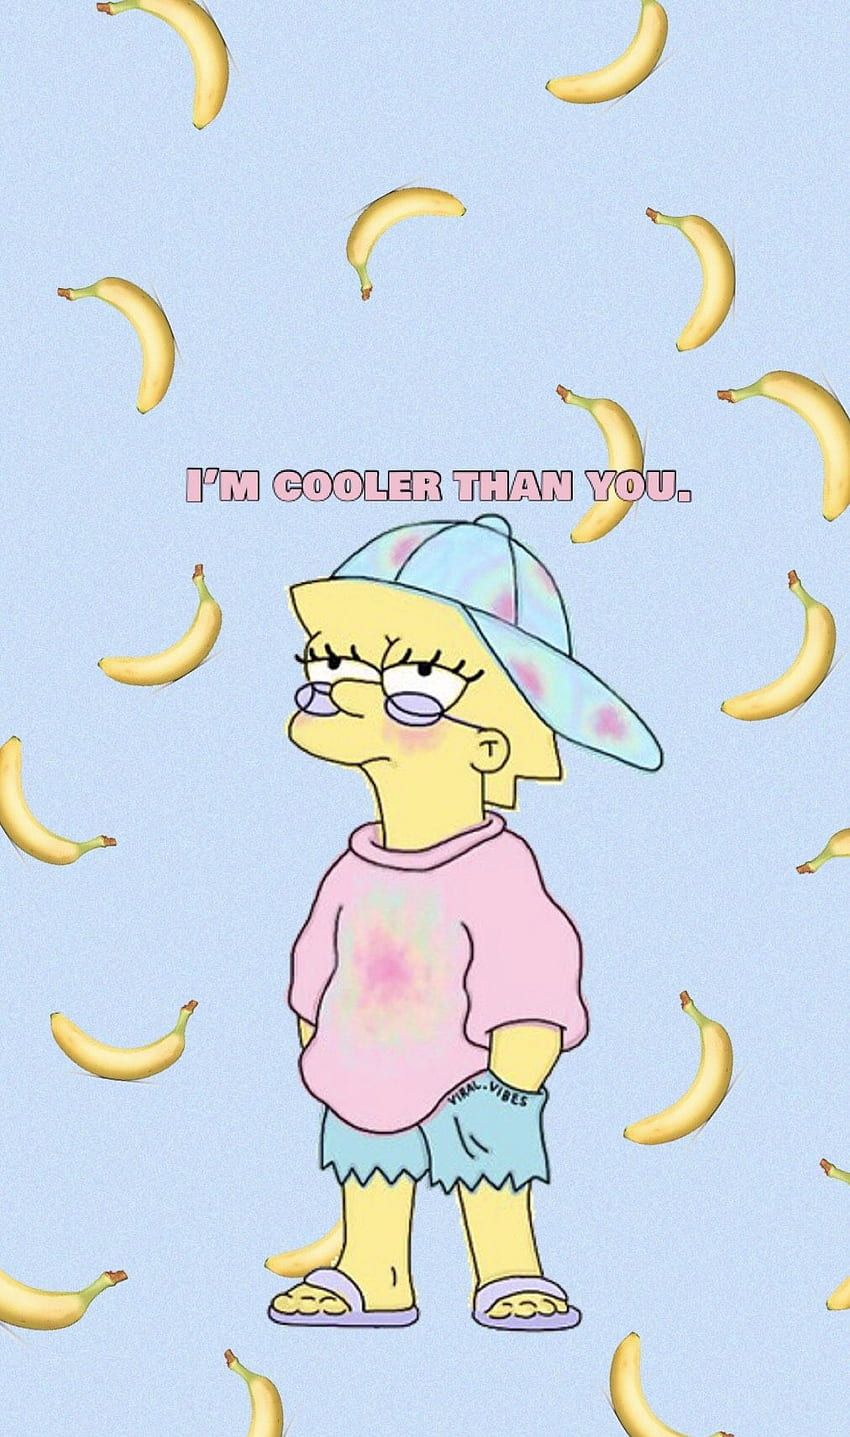 Lisa Simpson aesthetic wallpaper background with bananas and the words 